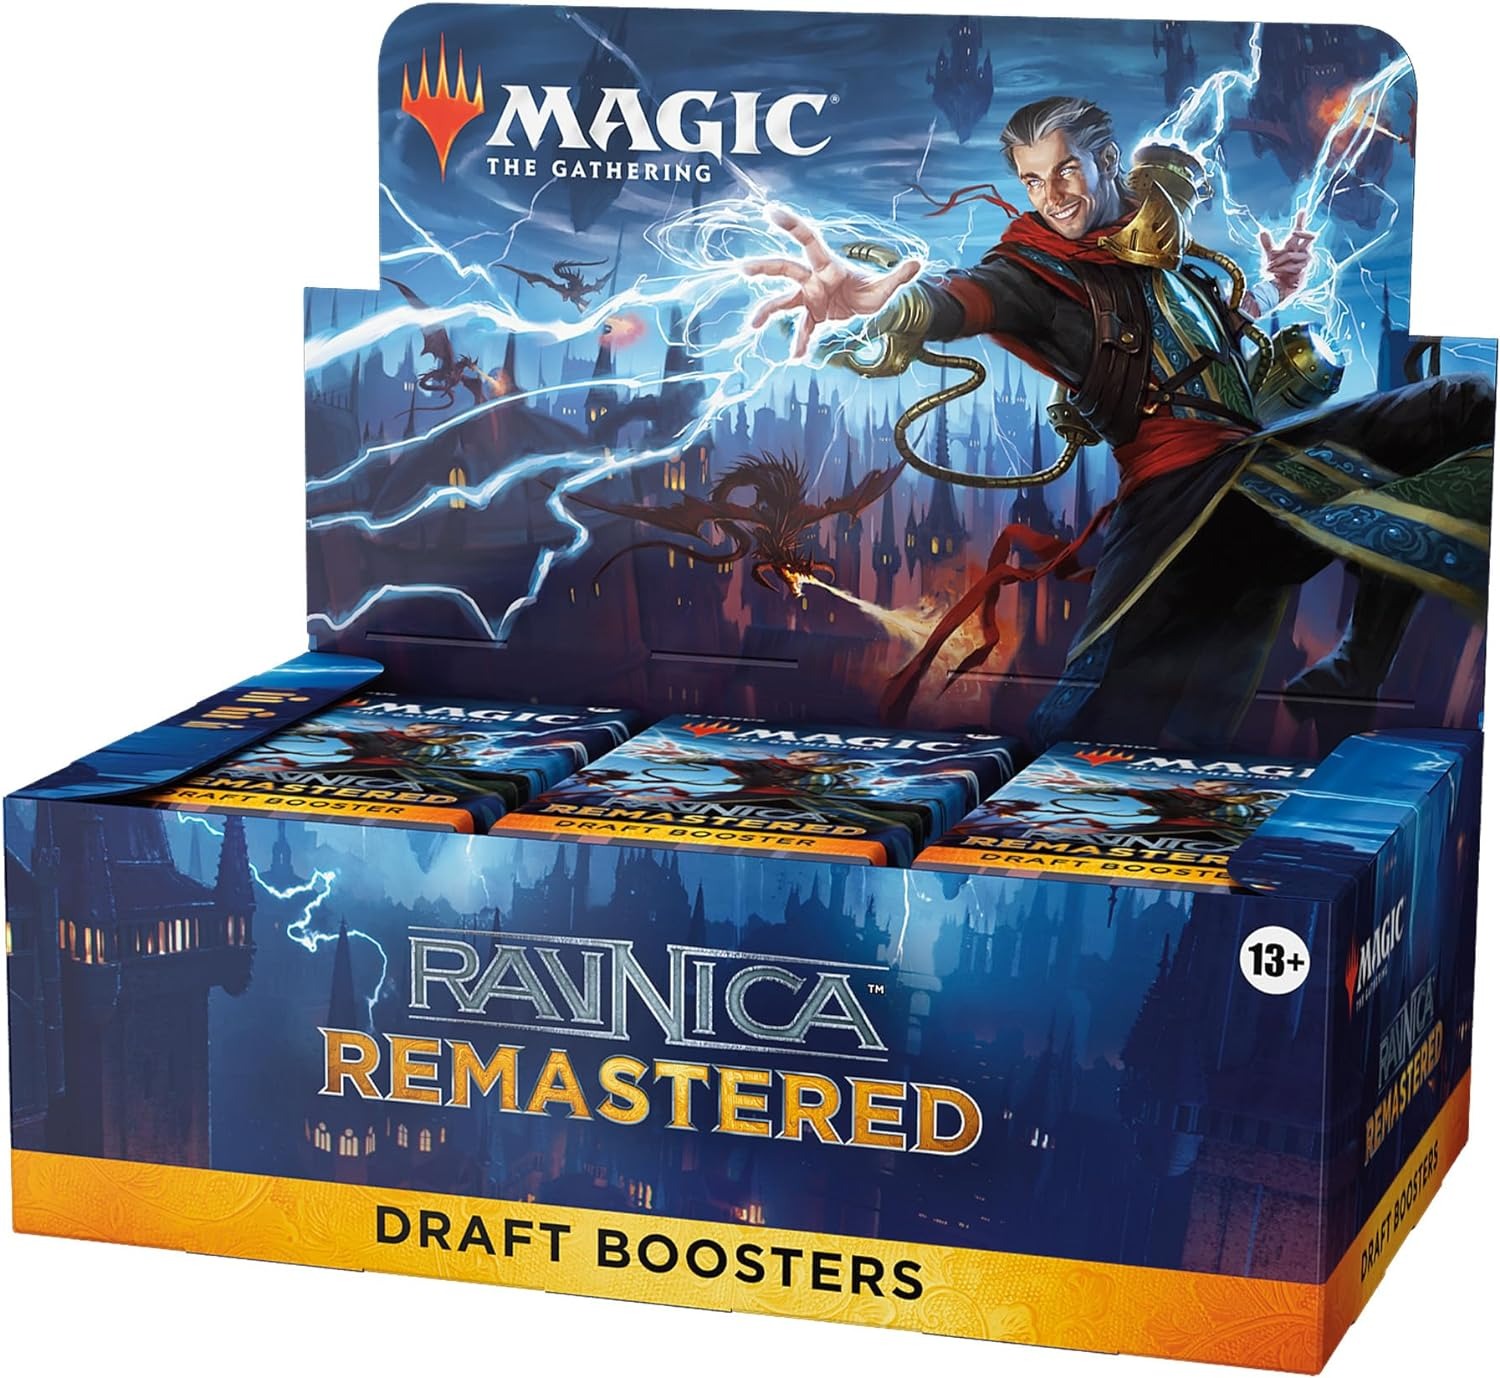 $124.37: Magic: The Gathering Ravnica Remastered Draft Booster Box - 36 Packs (540 Cards)